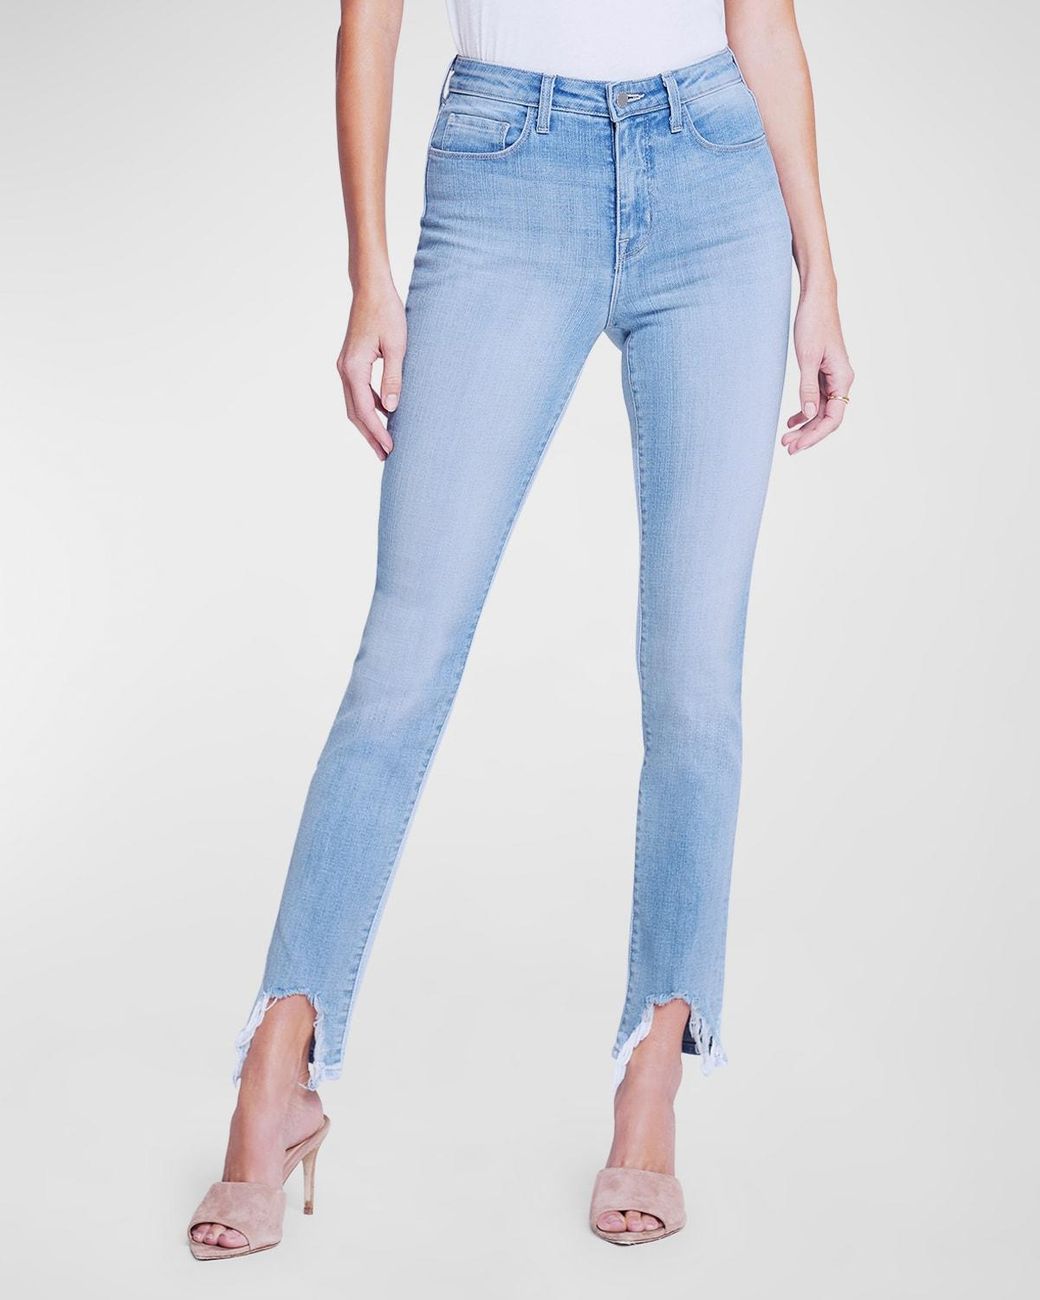 L'Agence Bowen High-rise Skinny Jeans in Blue | Lyst